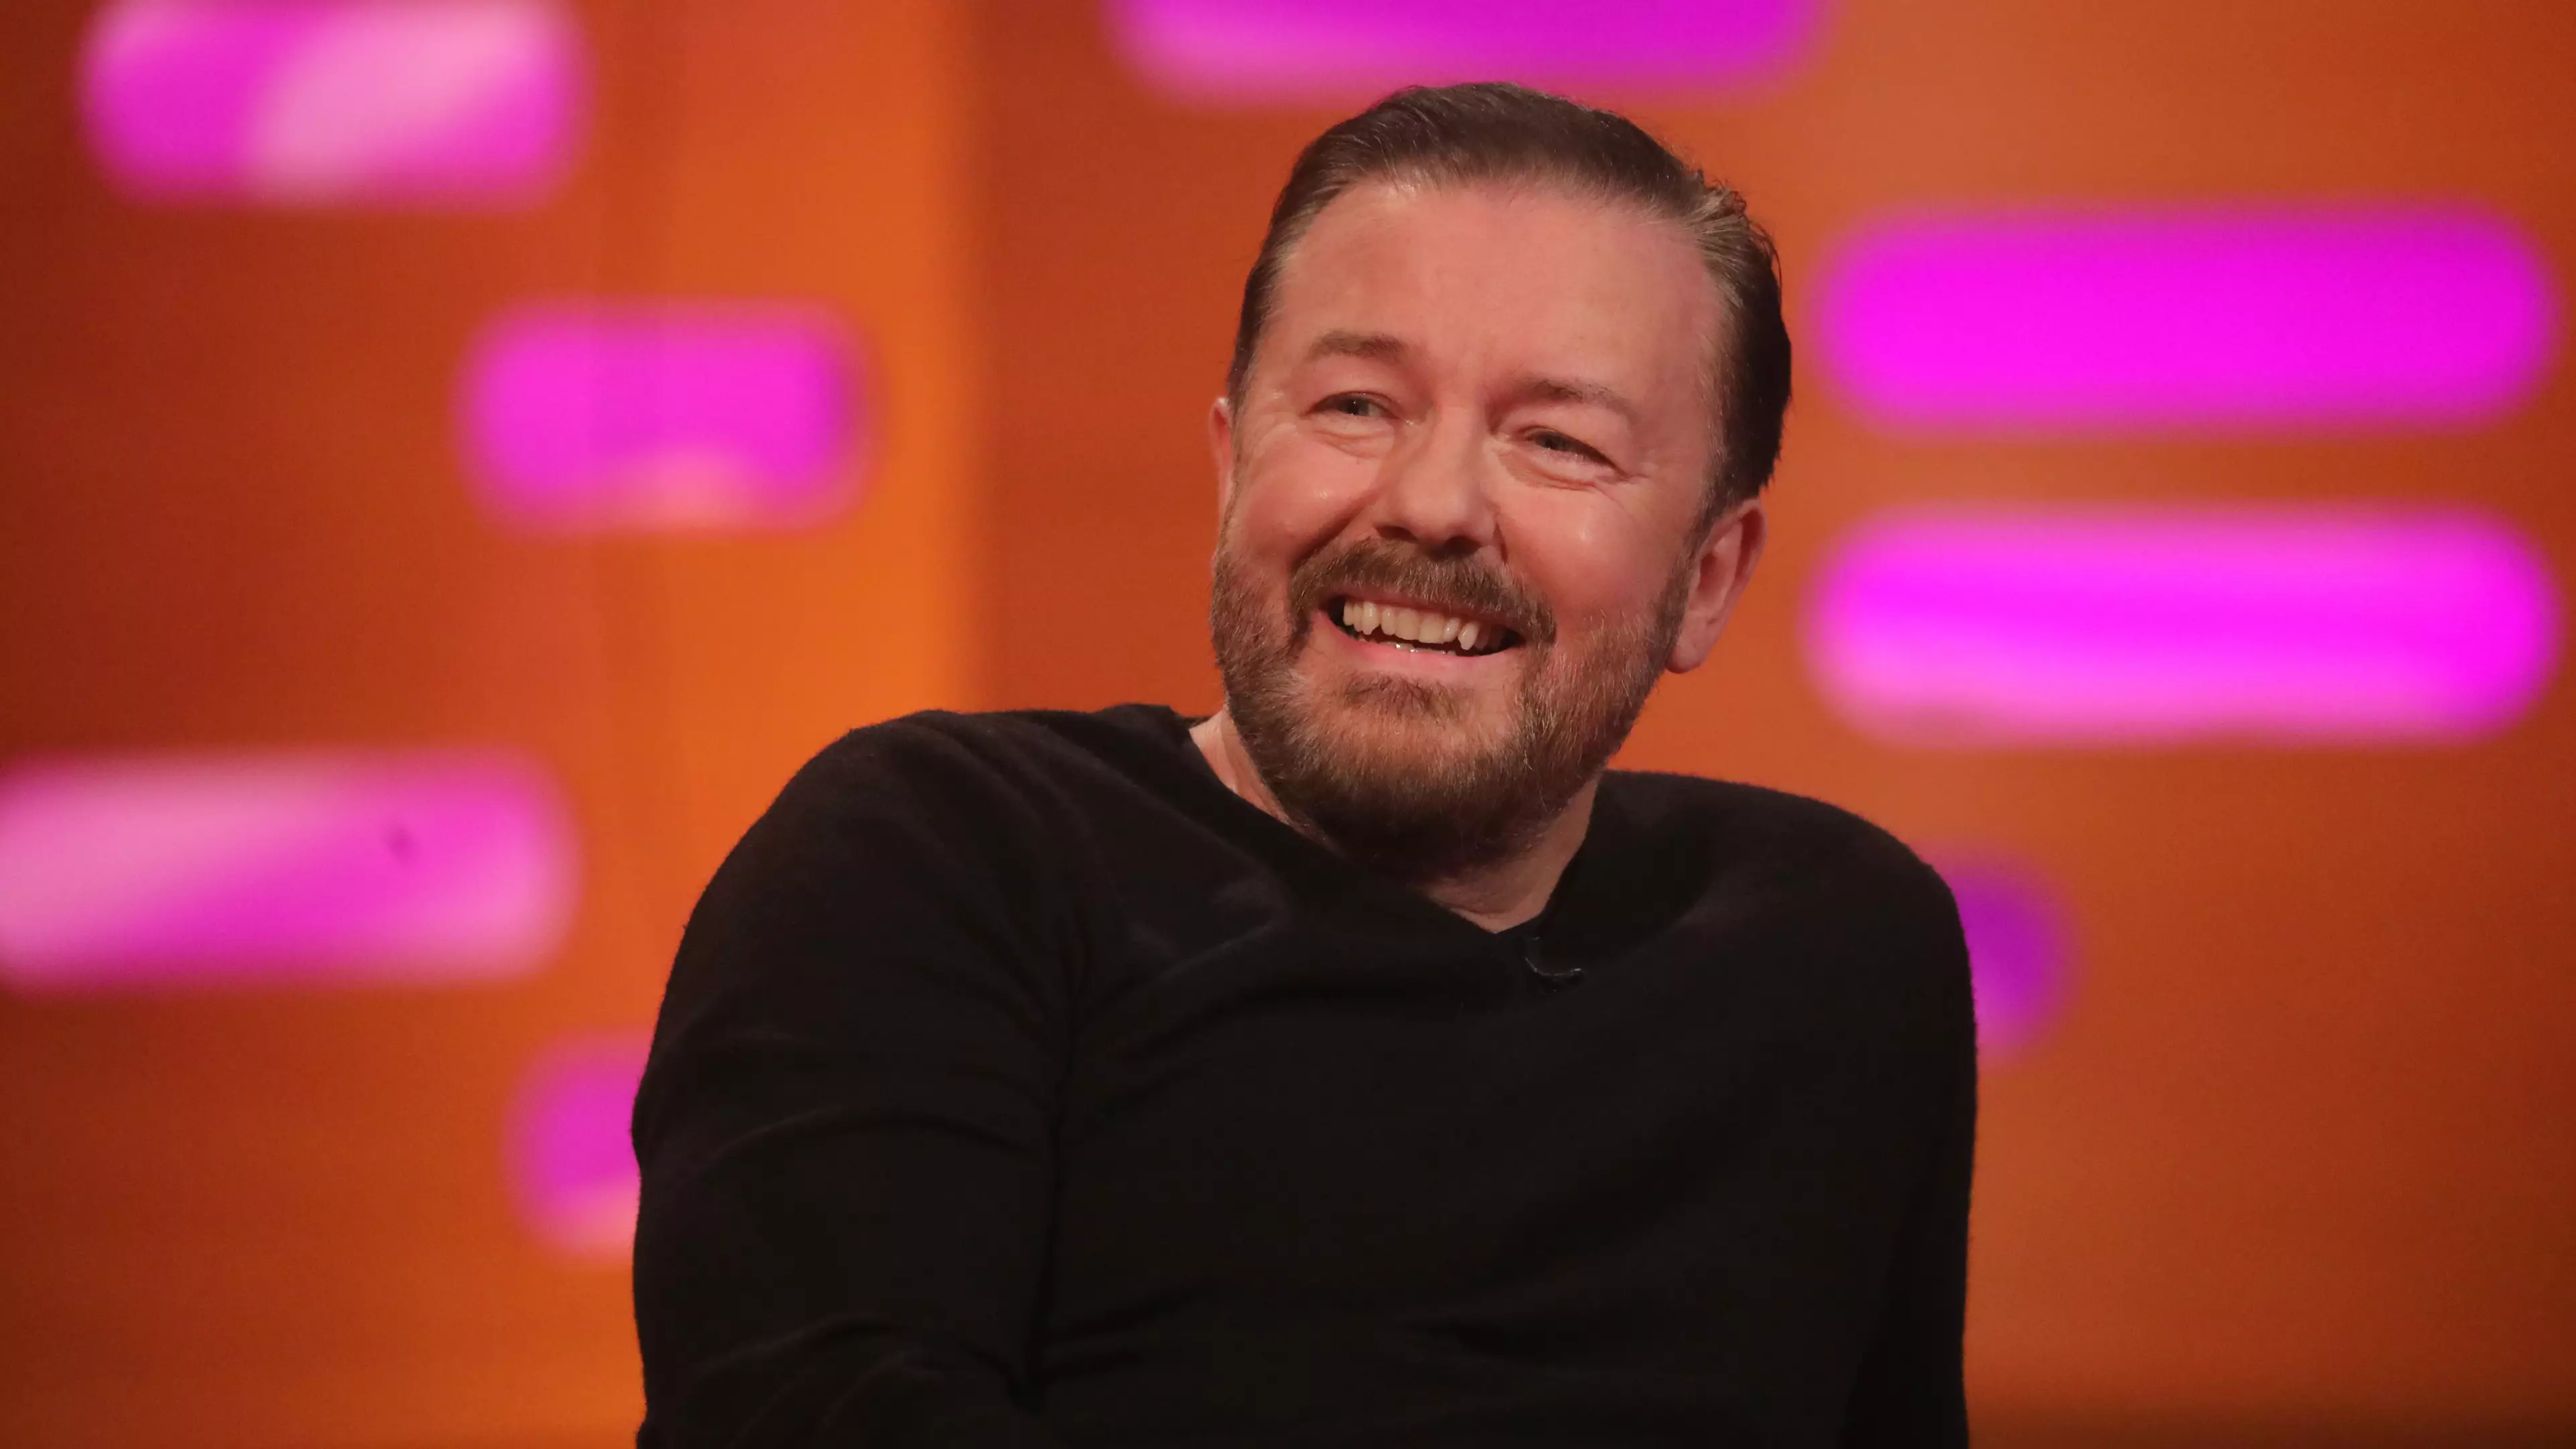 Ricky Gervais' Request To Have Body Eaten By Lions Rejected By London Zoo